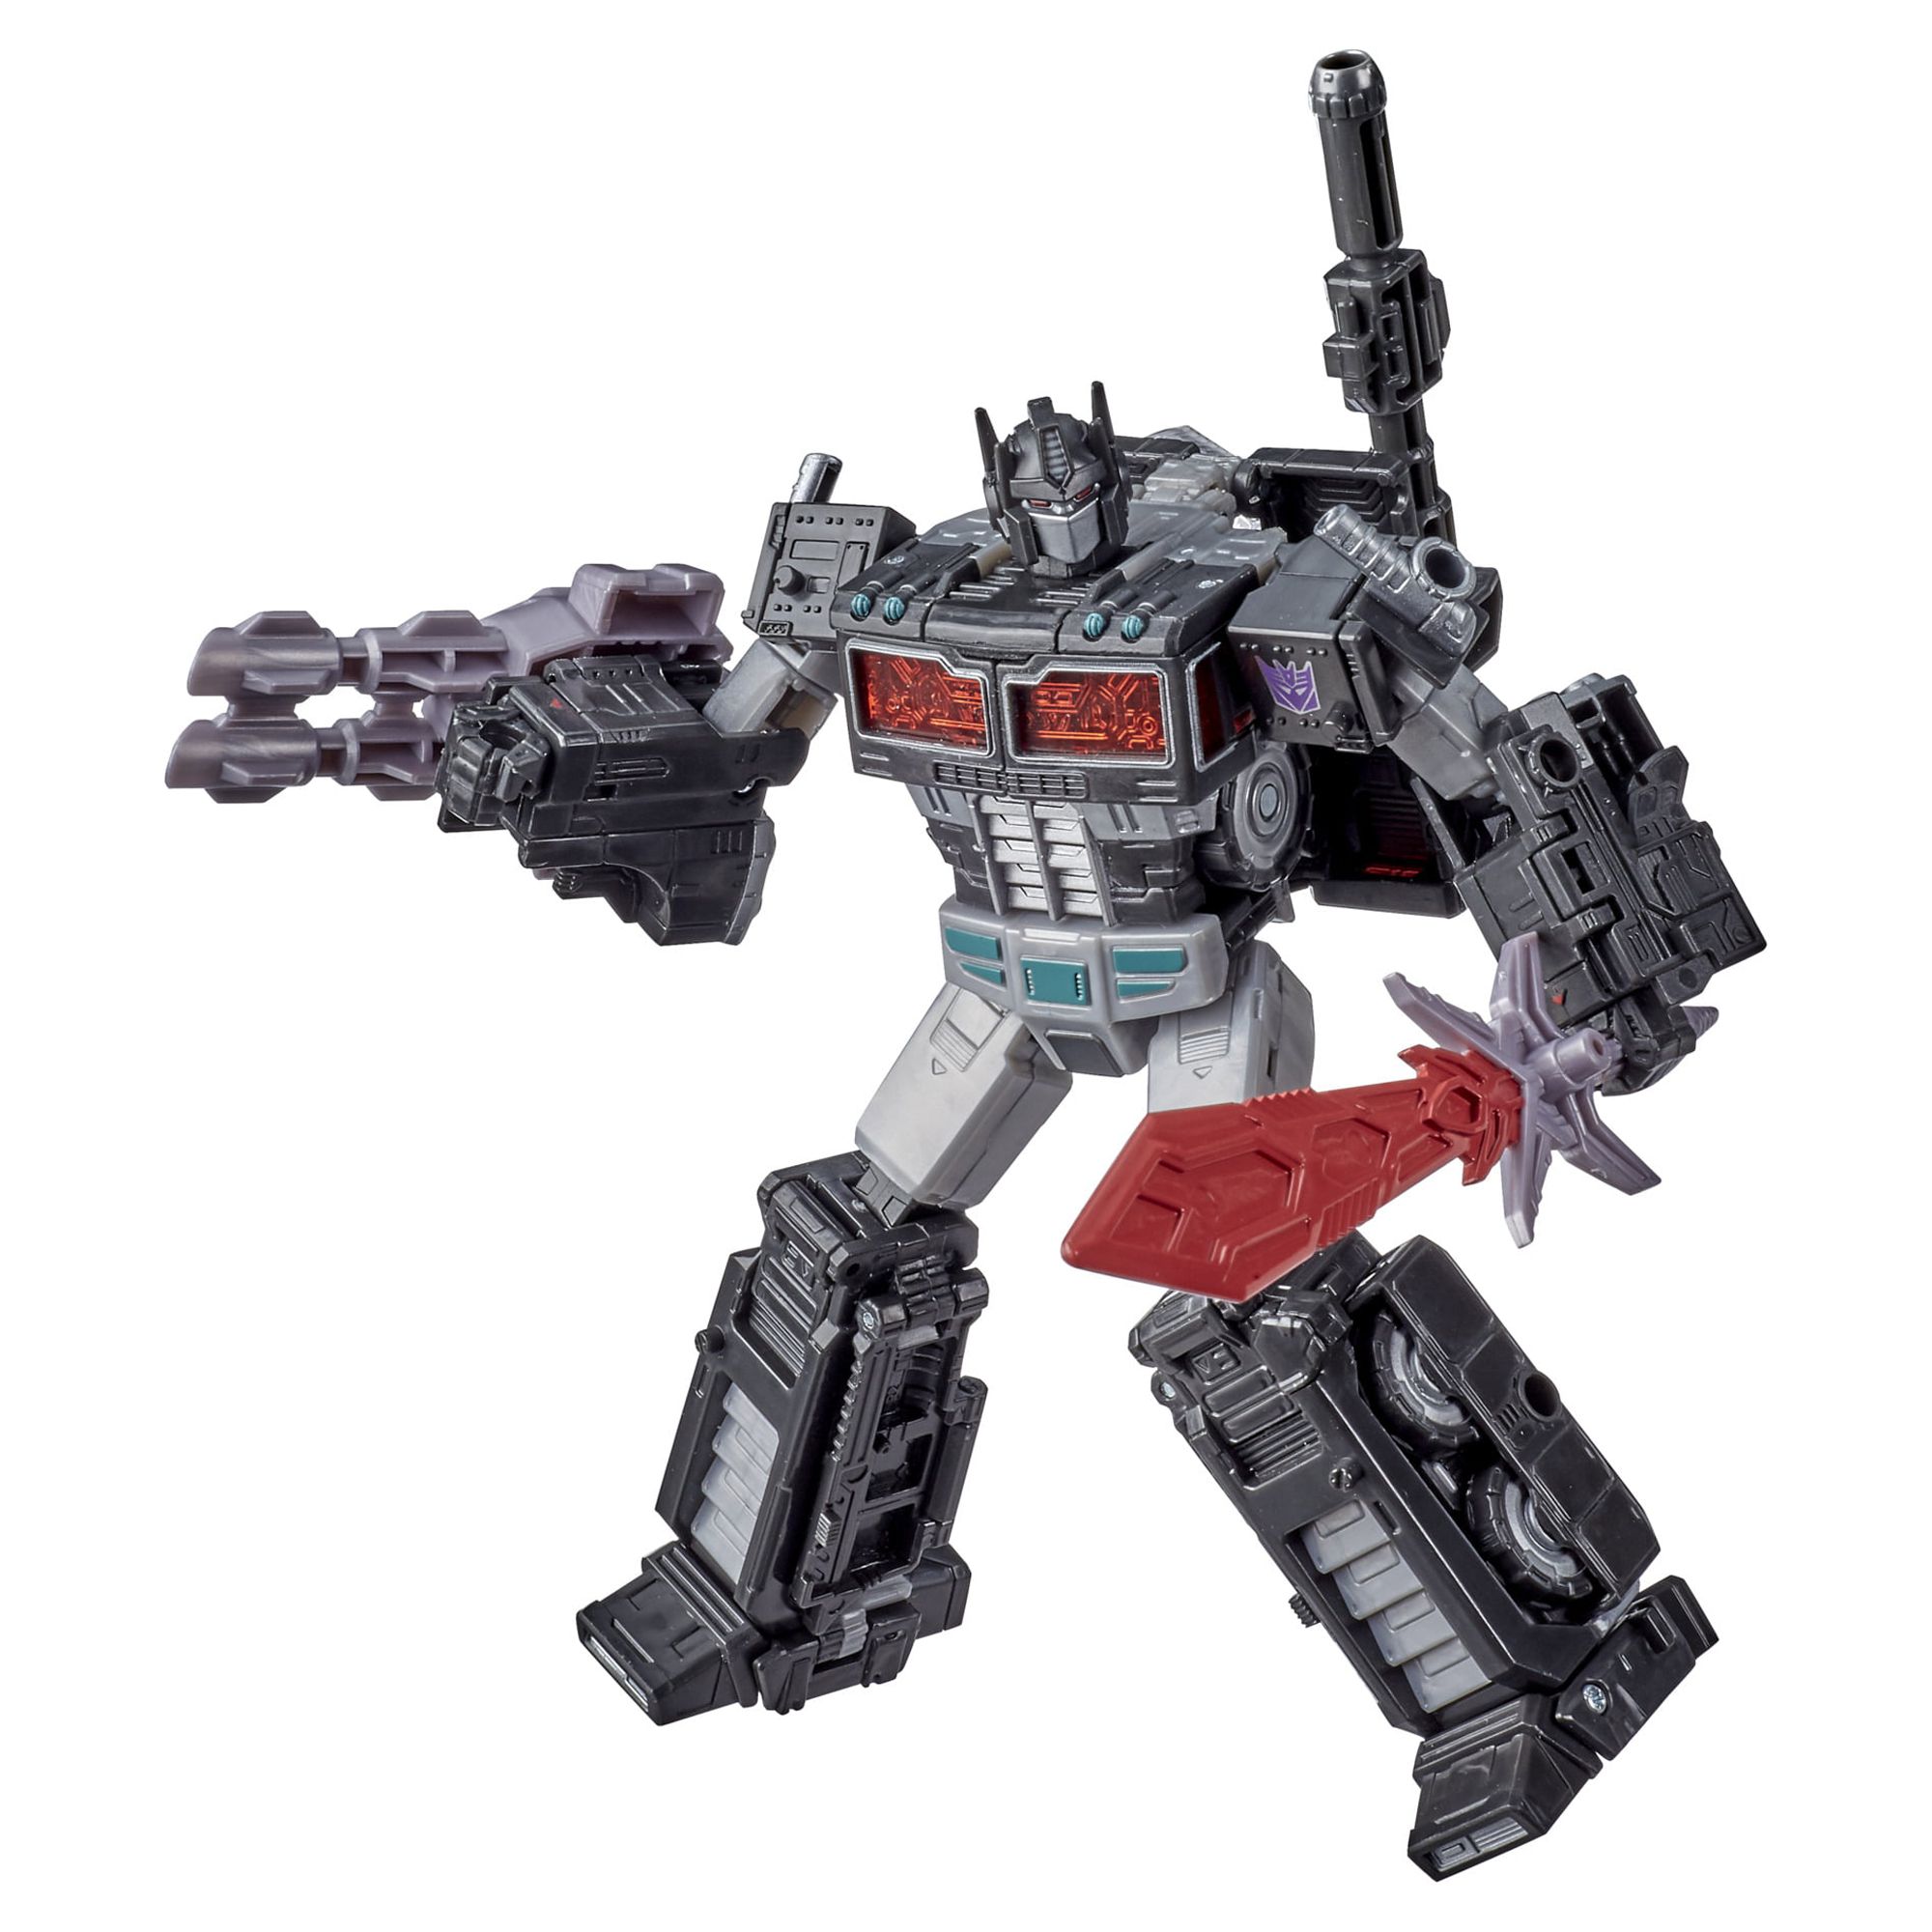 Transformers Generations War for Cybertron Series Leader Class Spoiler Pack - image 2 of 5